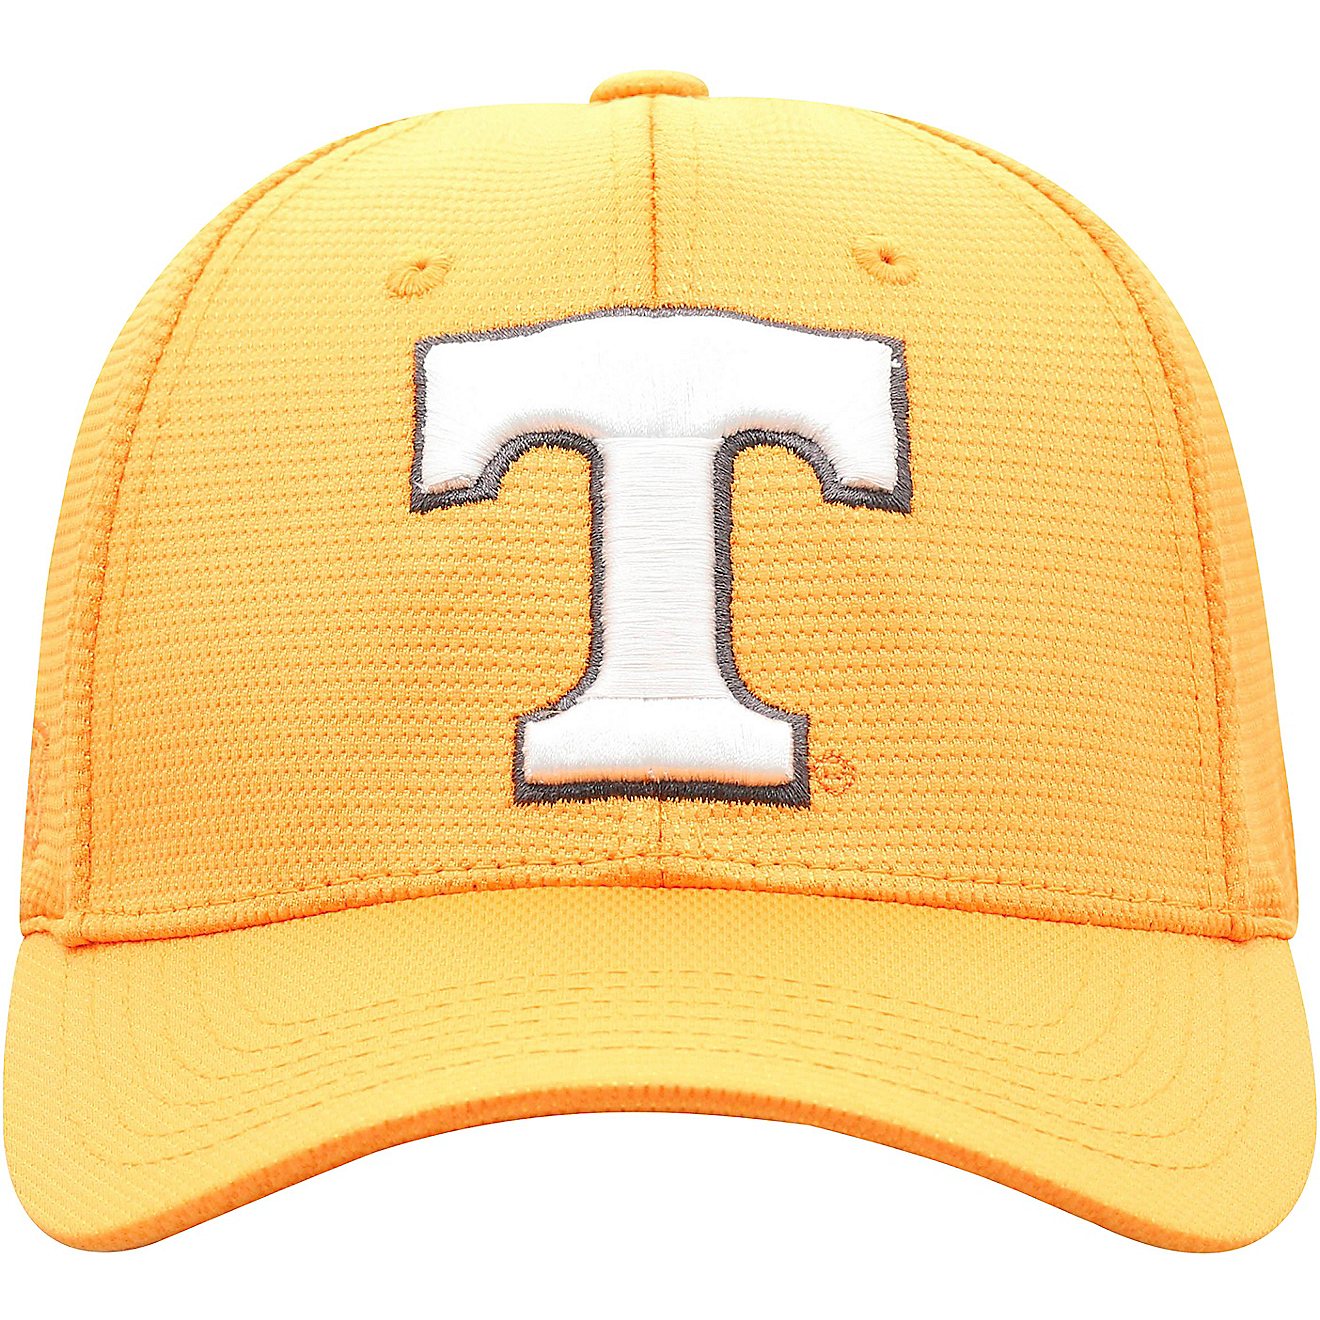 Top of the World Men's University of Tennessee Progo Cap                                                                         - view number 2